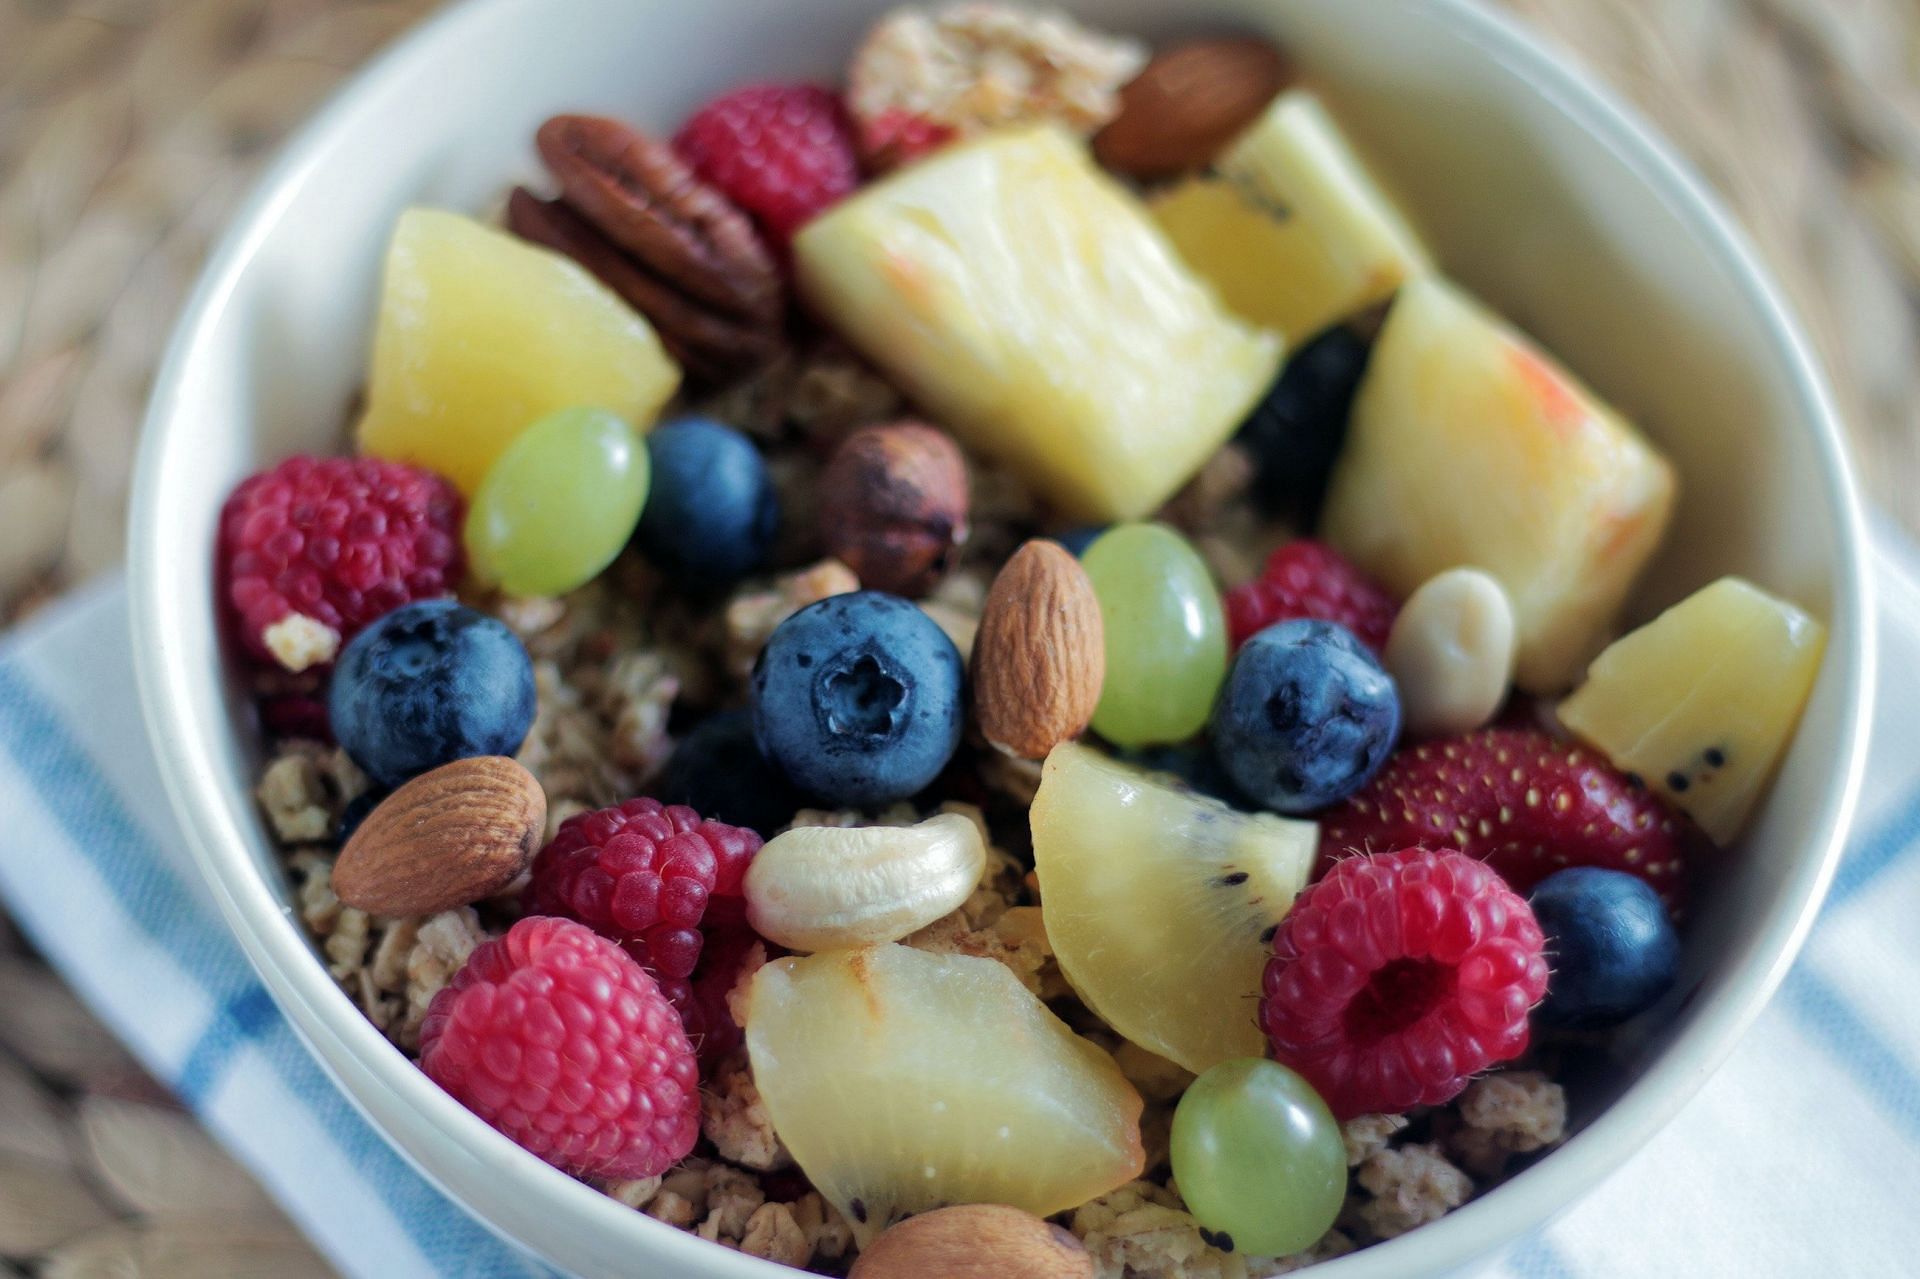 Pair nuts with fruit and yogurt for a healthy snack (Image via Pexels/Jeshoots)